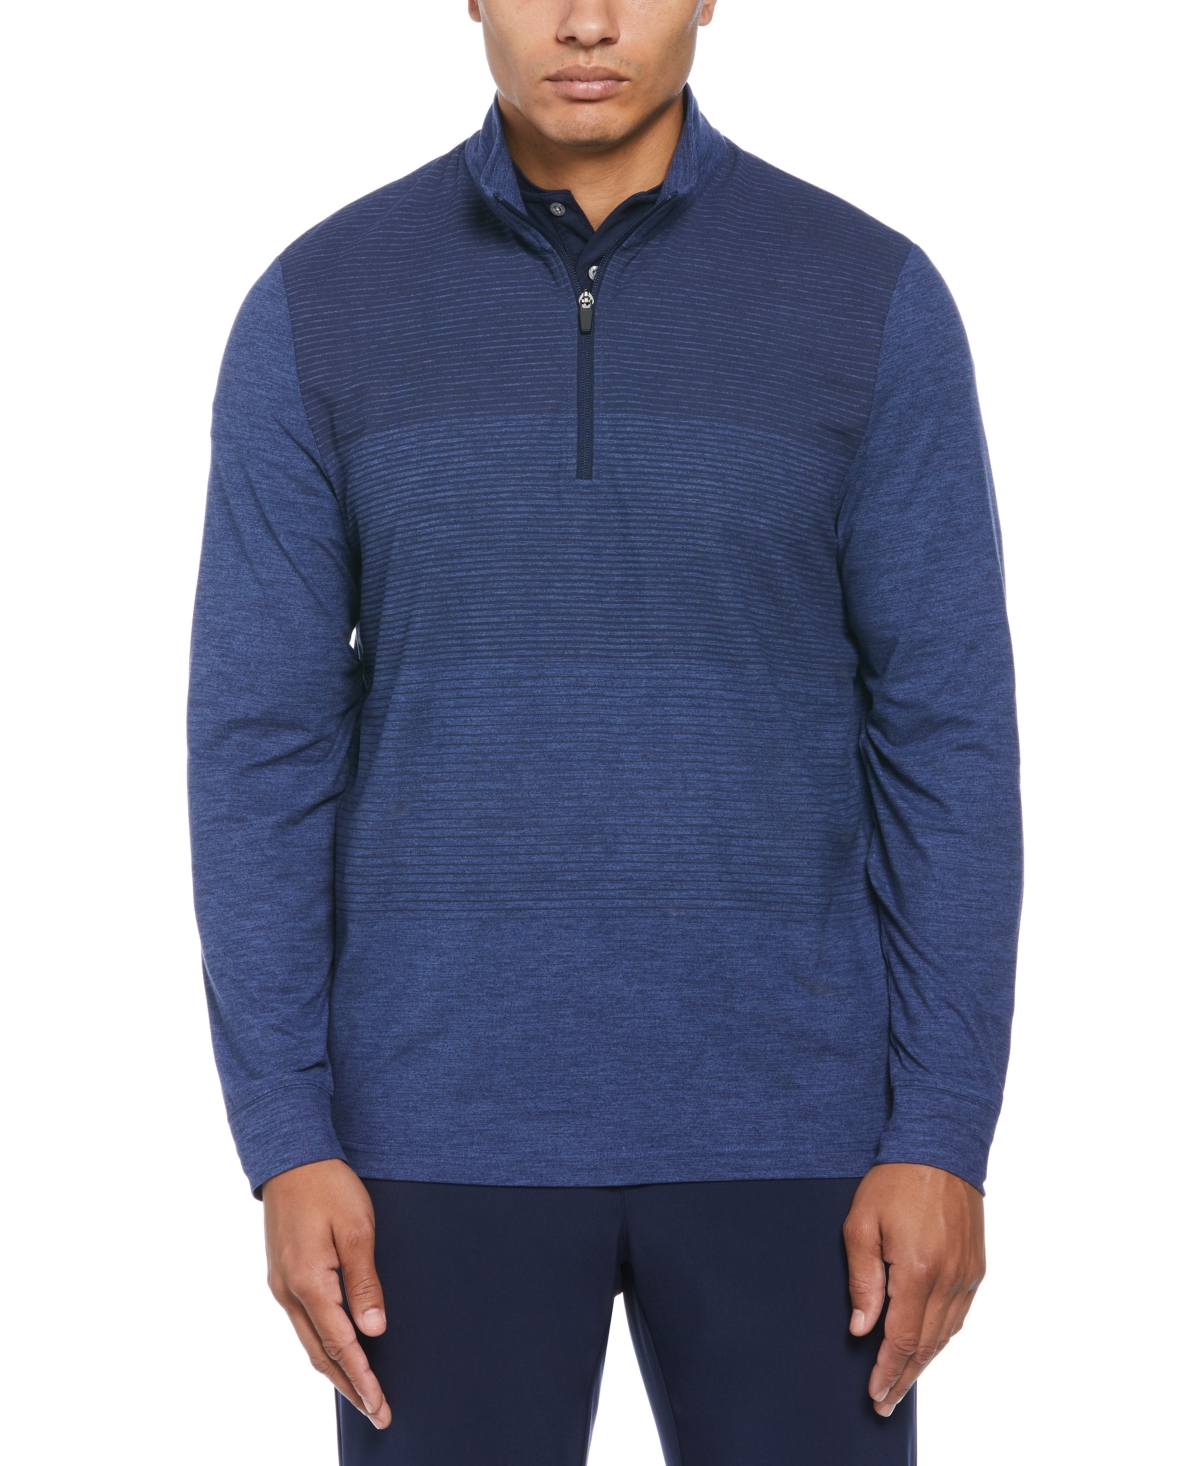 Men's Lux Touch Ombre Golf Sweater - Peacoat Heather